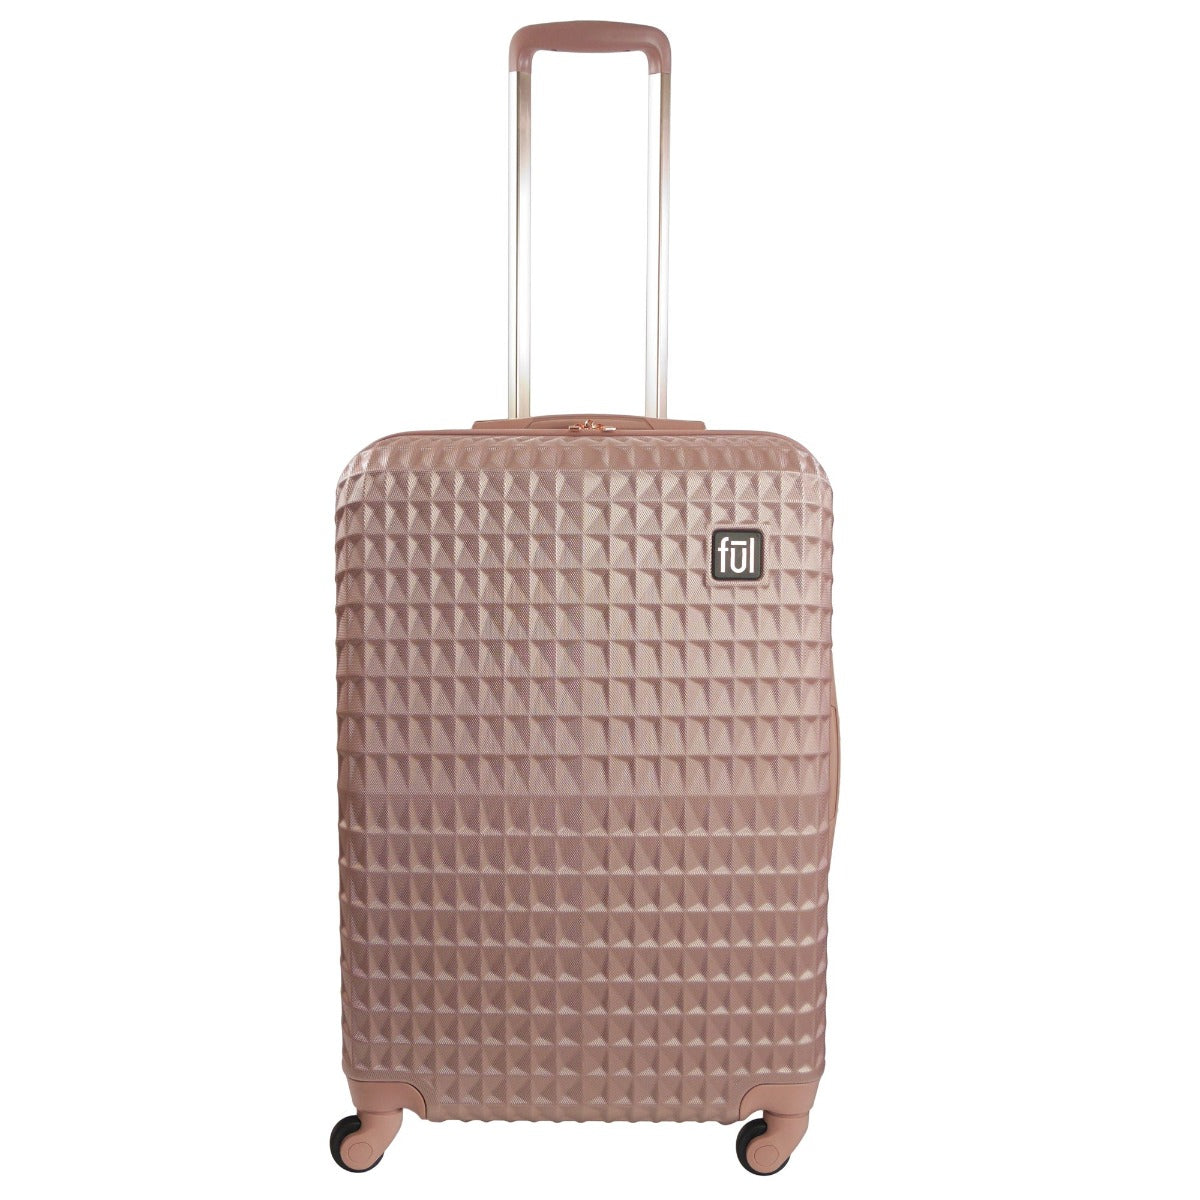 Ful Geo 26 inch hard sided spinner suitcase checked bag luggage rose gold